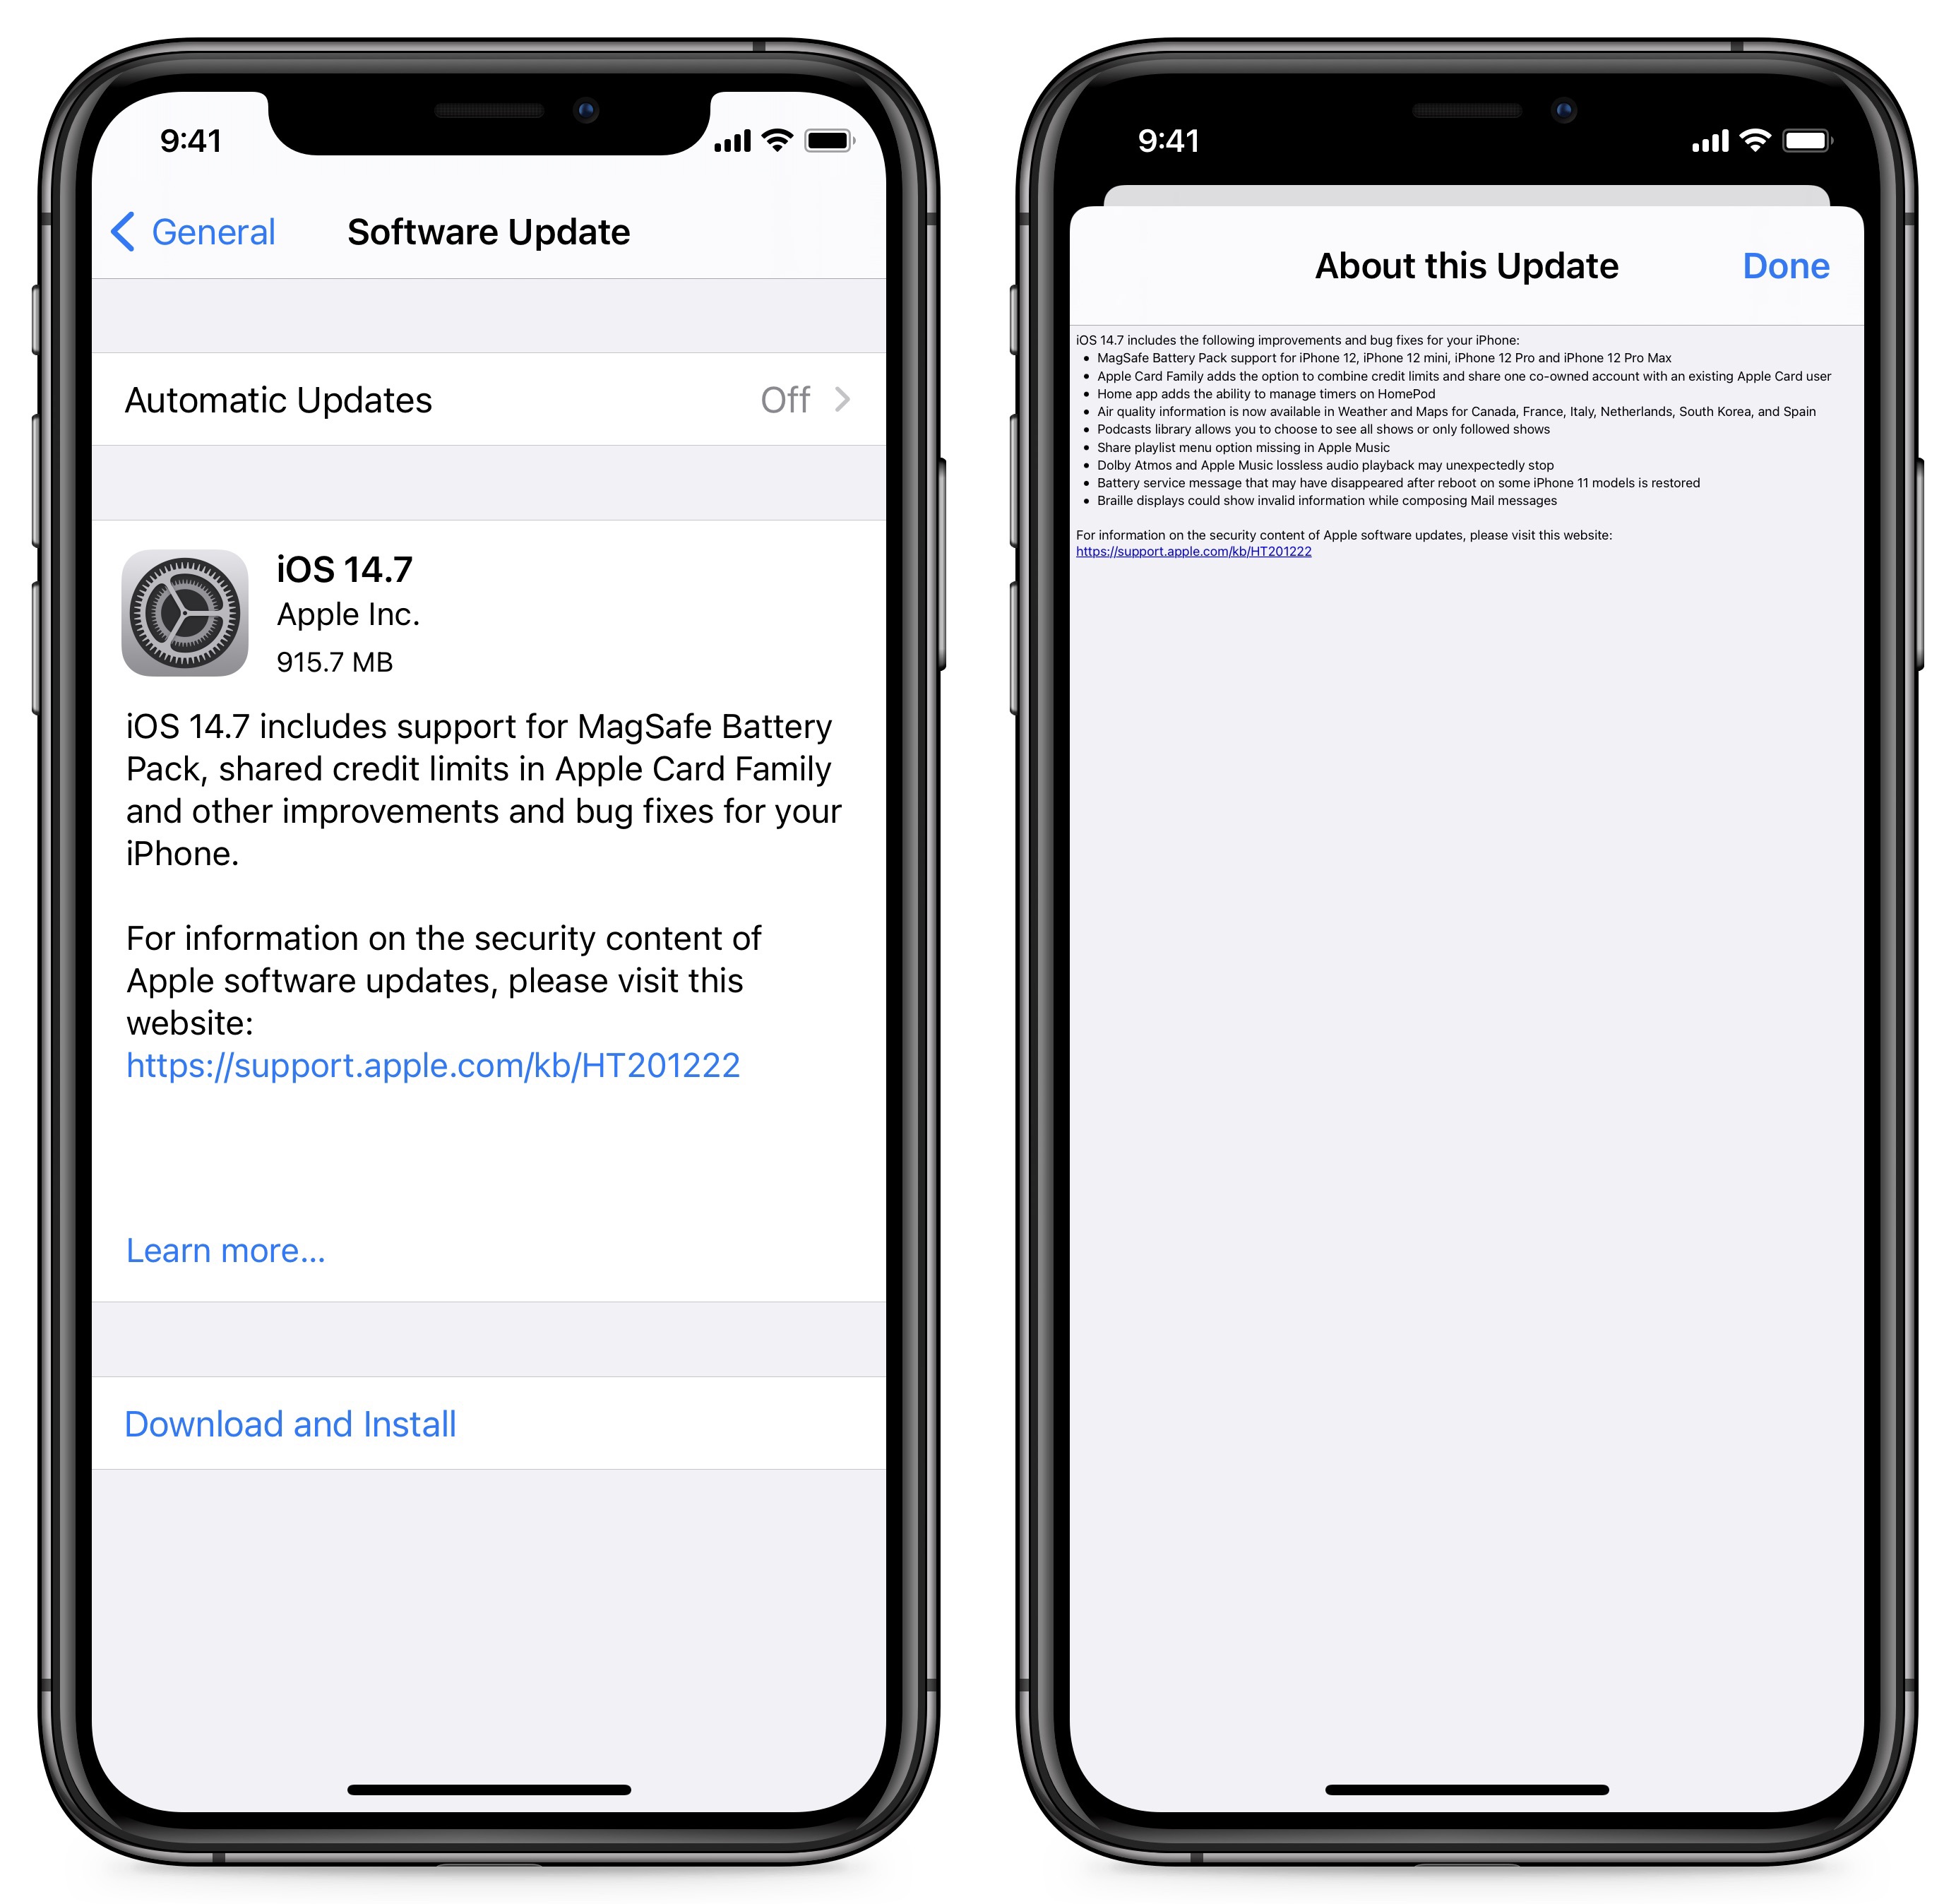 Apple rolls out iOS 14.7 with MagSafe Battery Pack support for